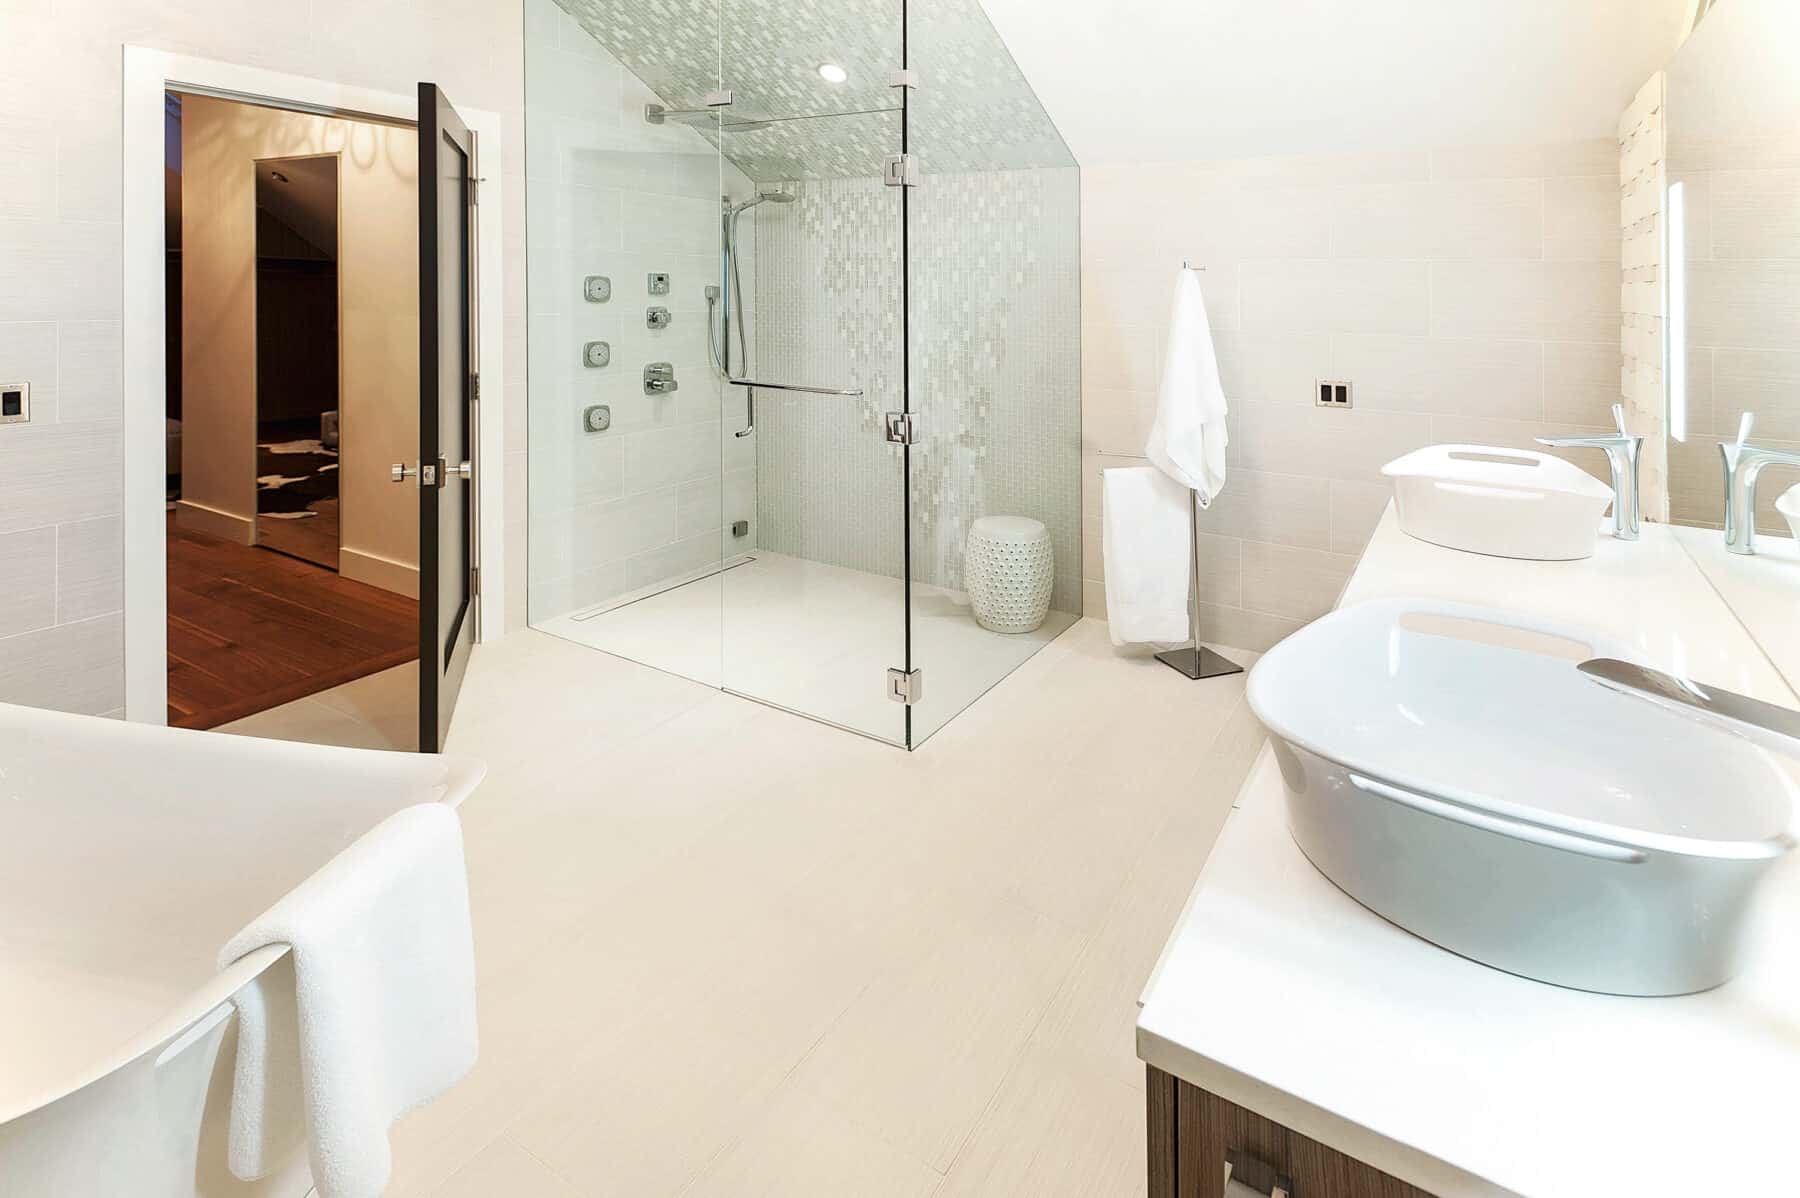 White on White Master Bathroom with Glass Shower Walls in Aspen, Colorado Custom Home. Luxury Home Building Interiors